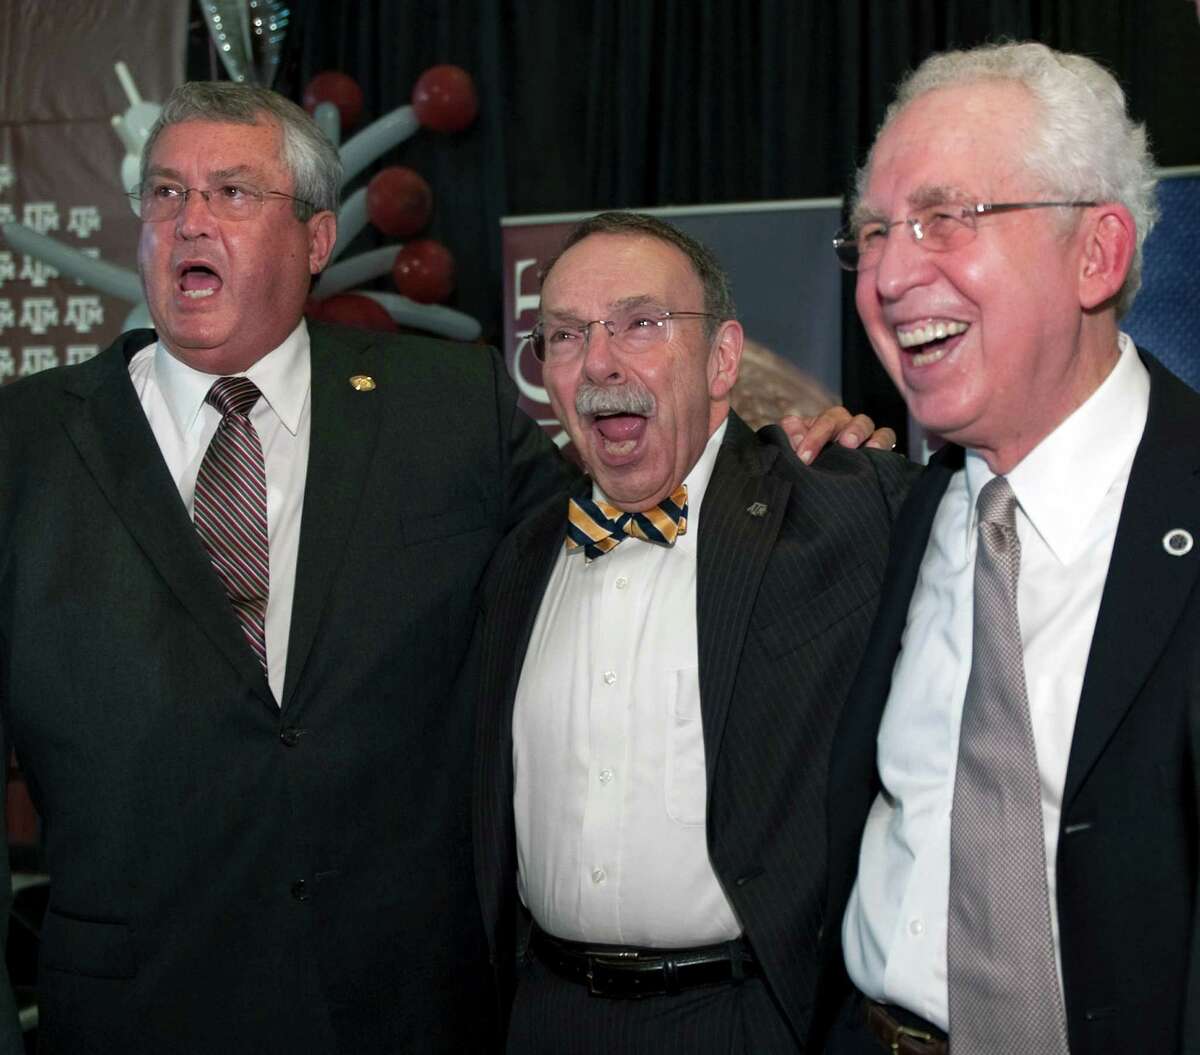 Texas A&M athletic director Bill Byrne, left, A&M president R. Bowen Loftin, center, and Southeastern Conference commissioner Mike Slive, right, react to the playing of the A&M school song during a celebration of A&M's move to the Southeastern Conference Monday, Sept. 26, 2011, in College Station, Texas. (AP Photo/Dave Einsel)